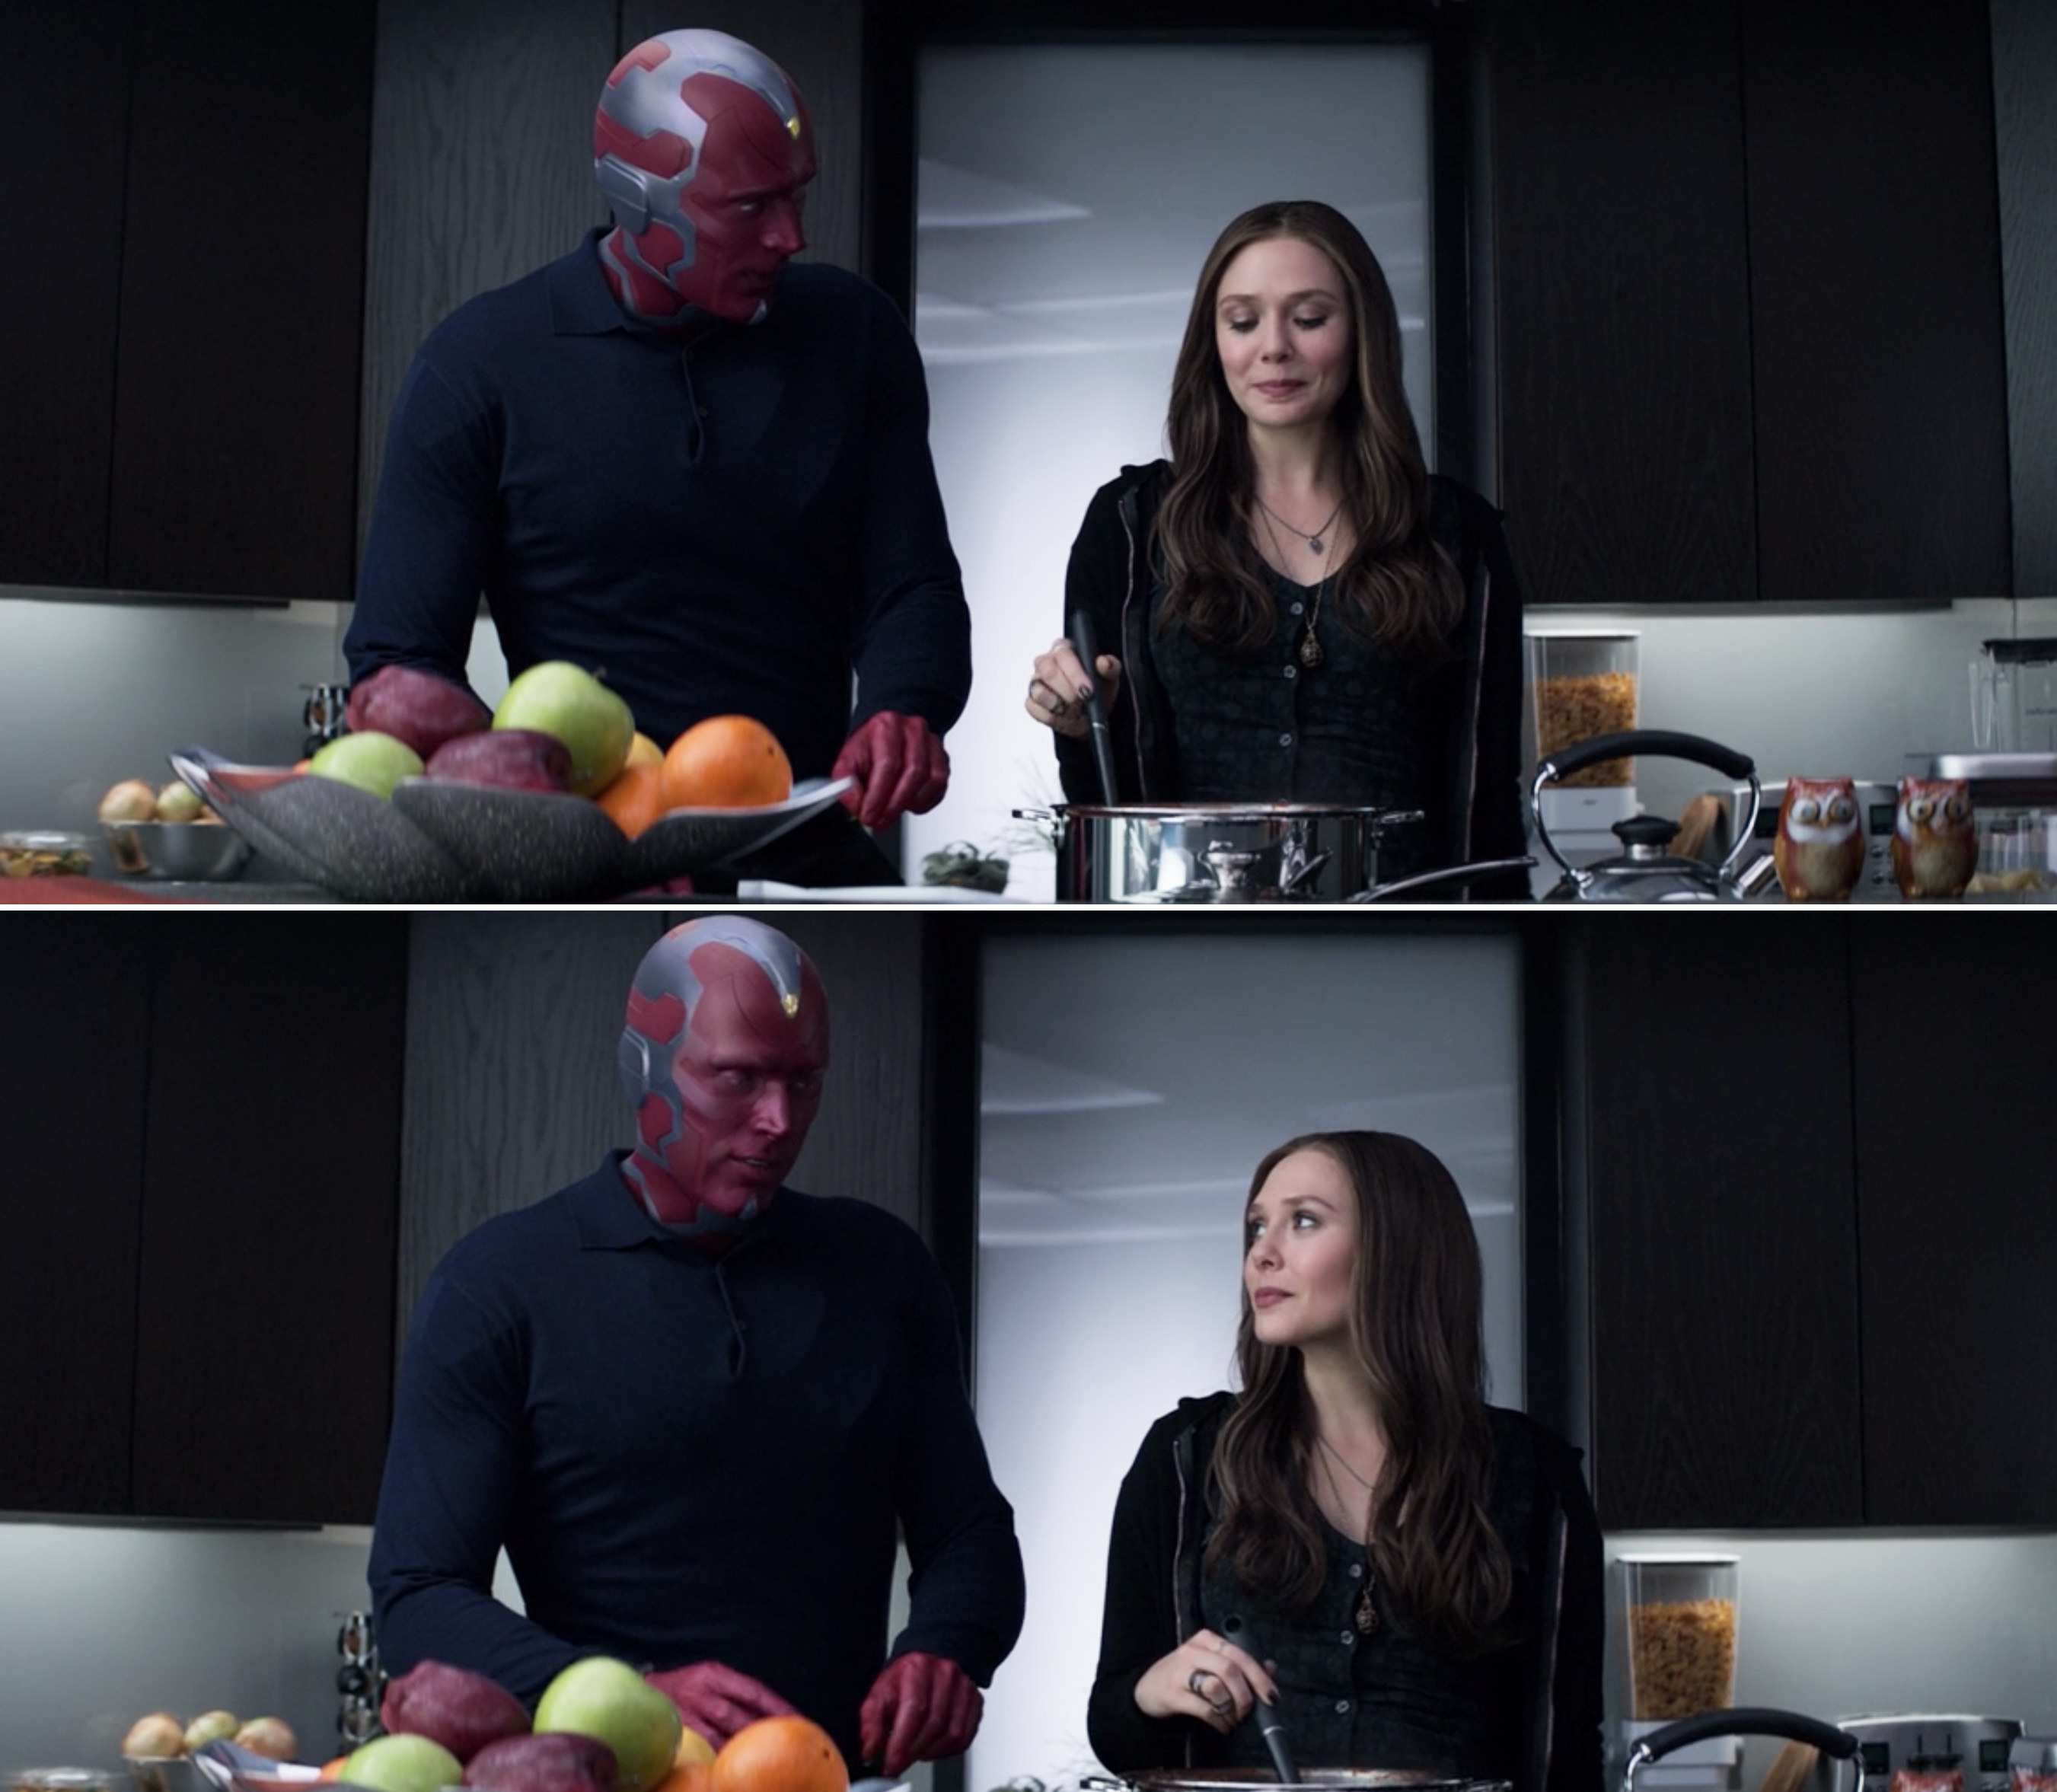 Wanda and Vision cooking together